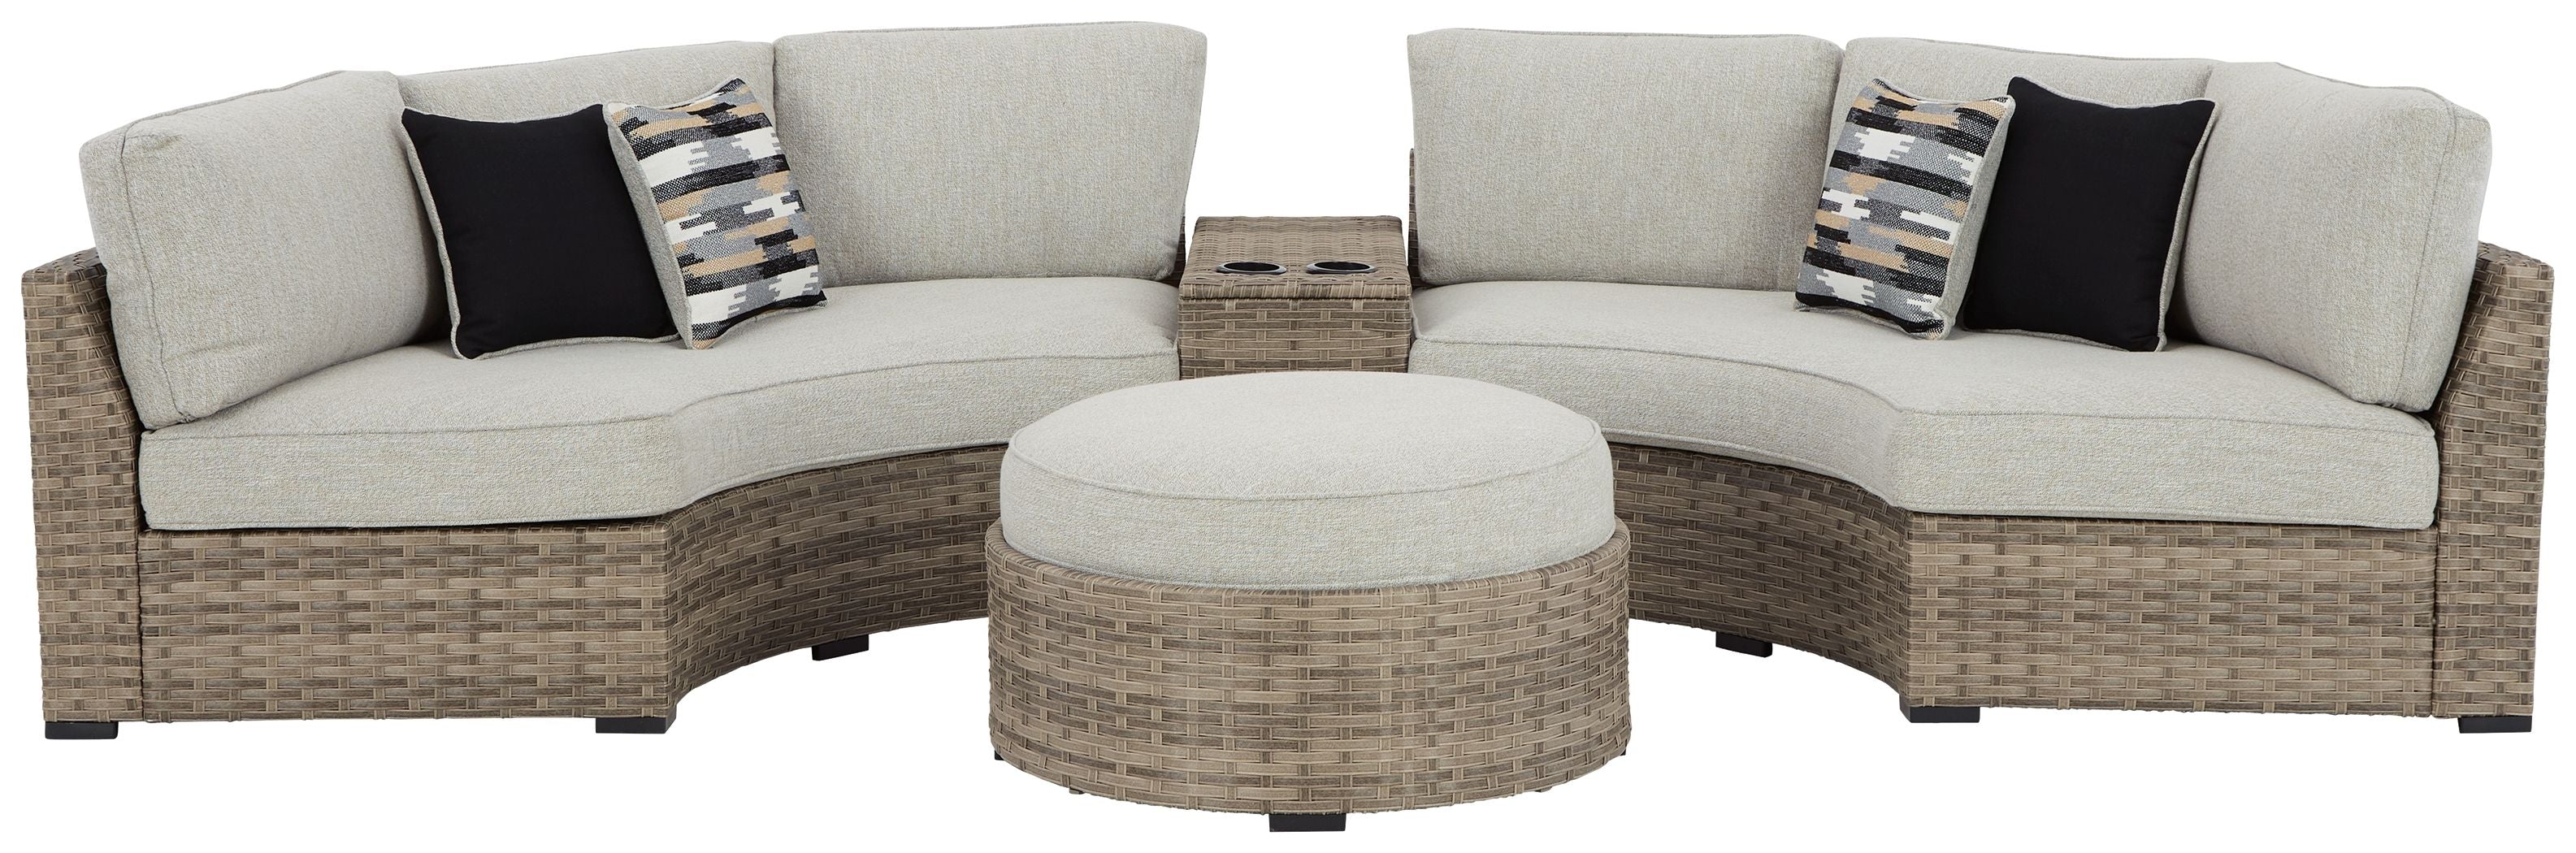 Calworth - Beige - Sectional Lounge-Stationary Sectionals-American Furniture Outlet